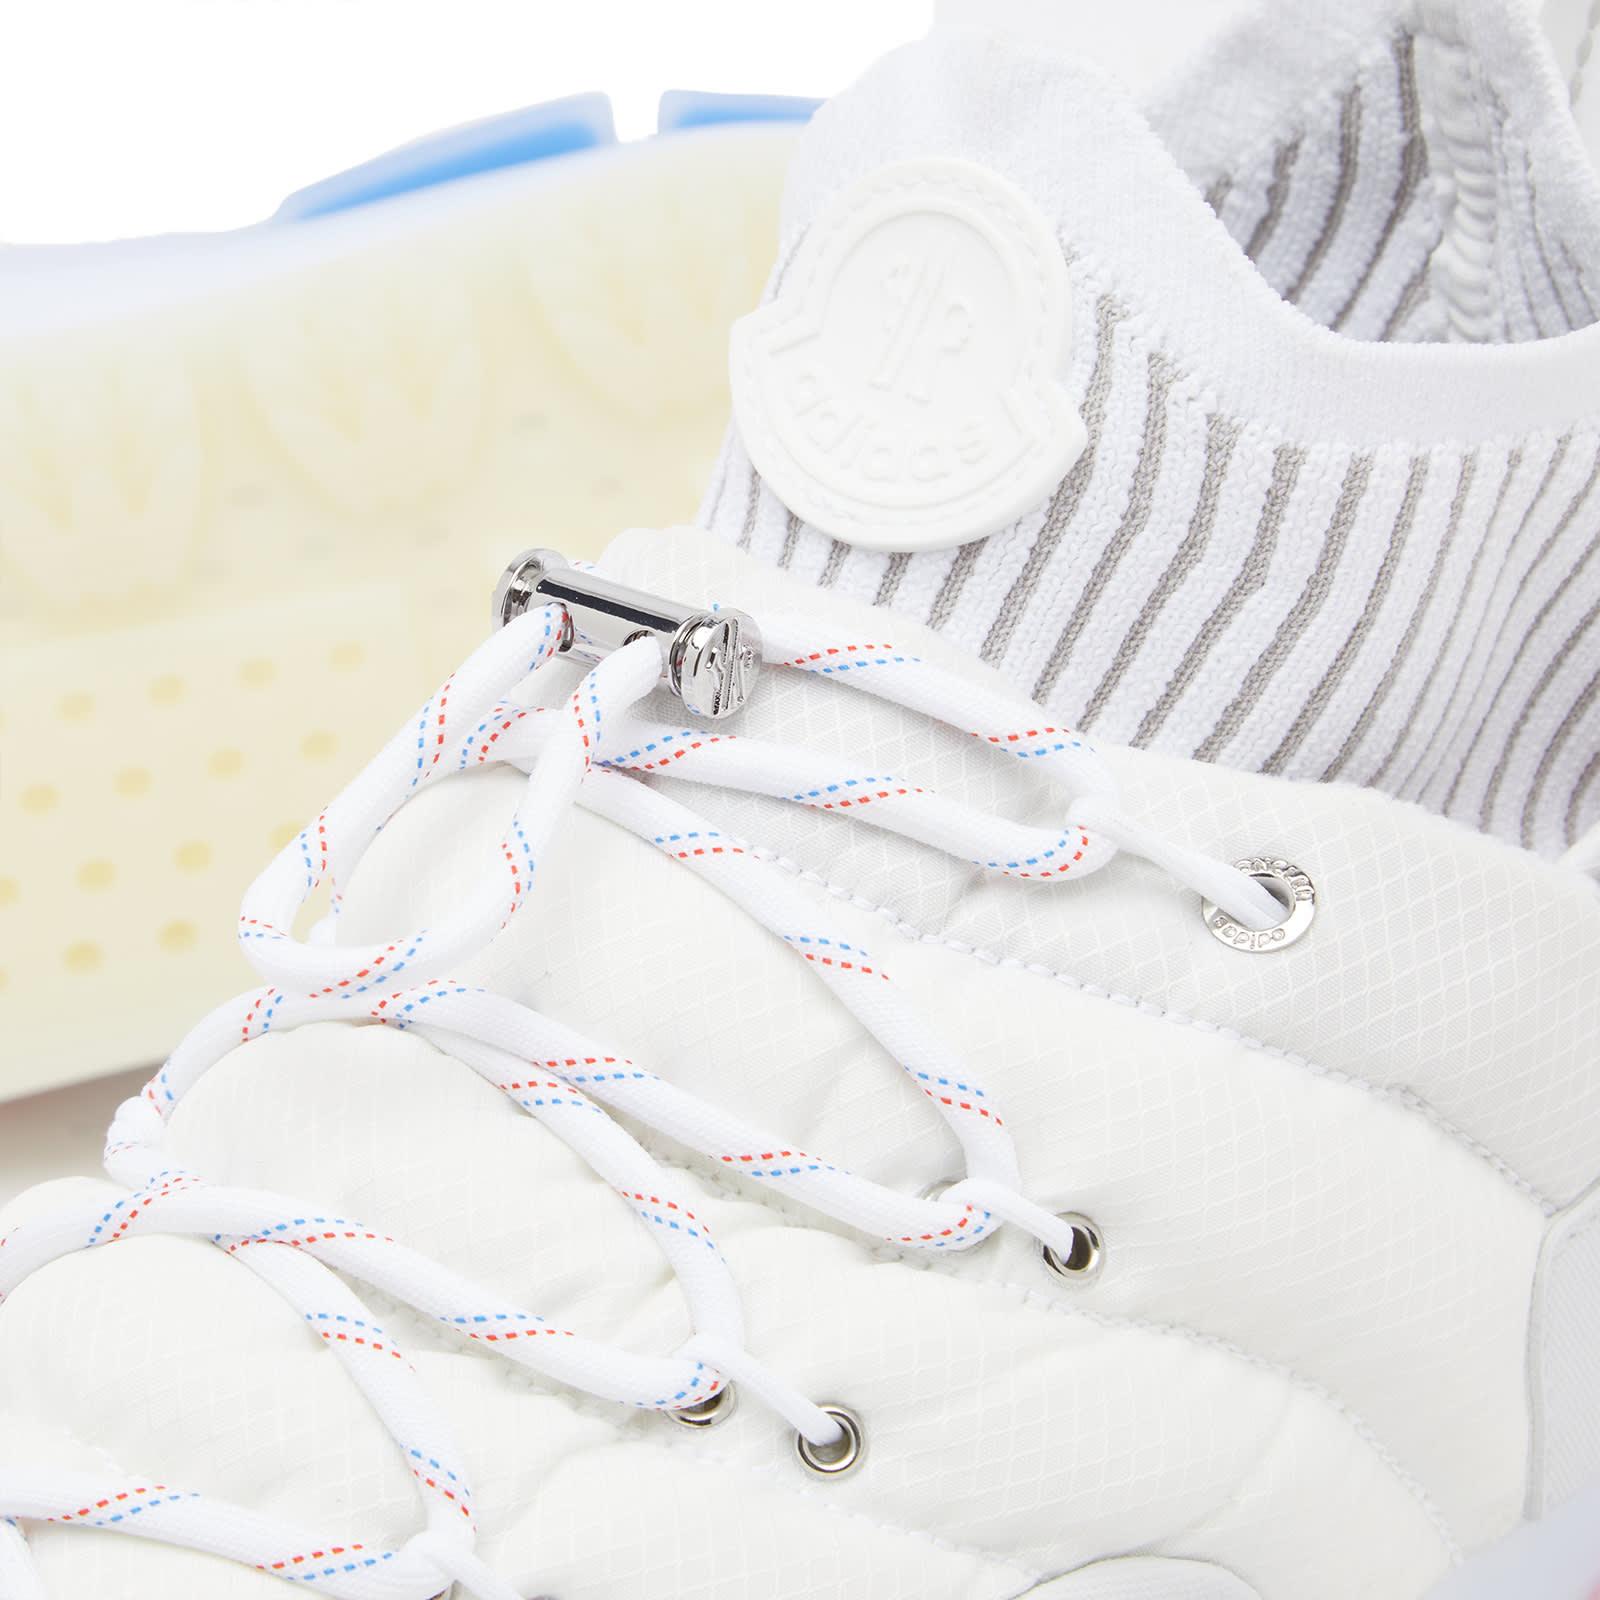 Moncler X Adidas Originals Nmd Runner Sneakers in White | Lyst UK